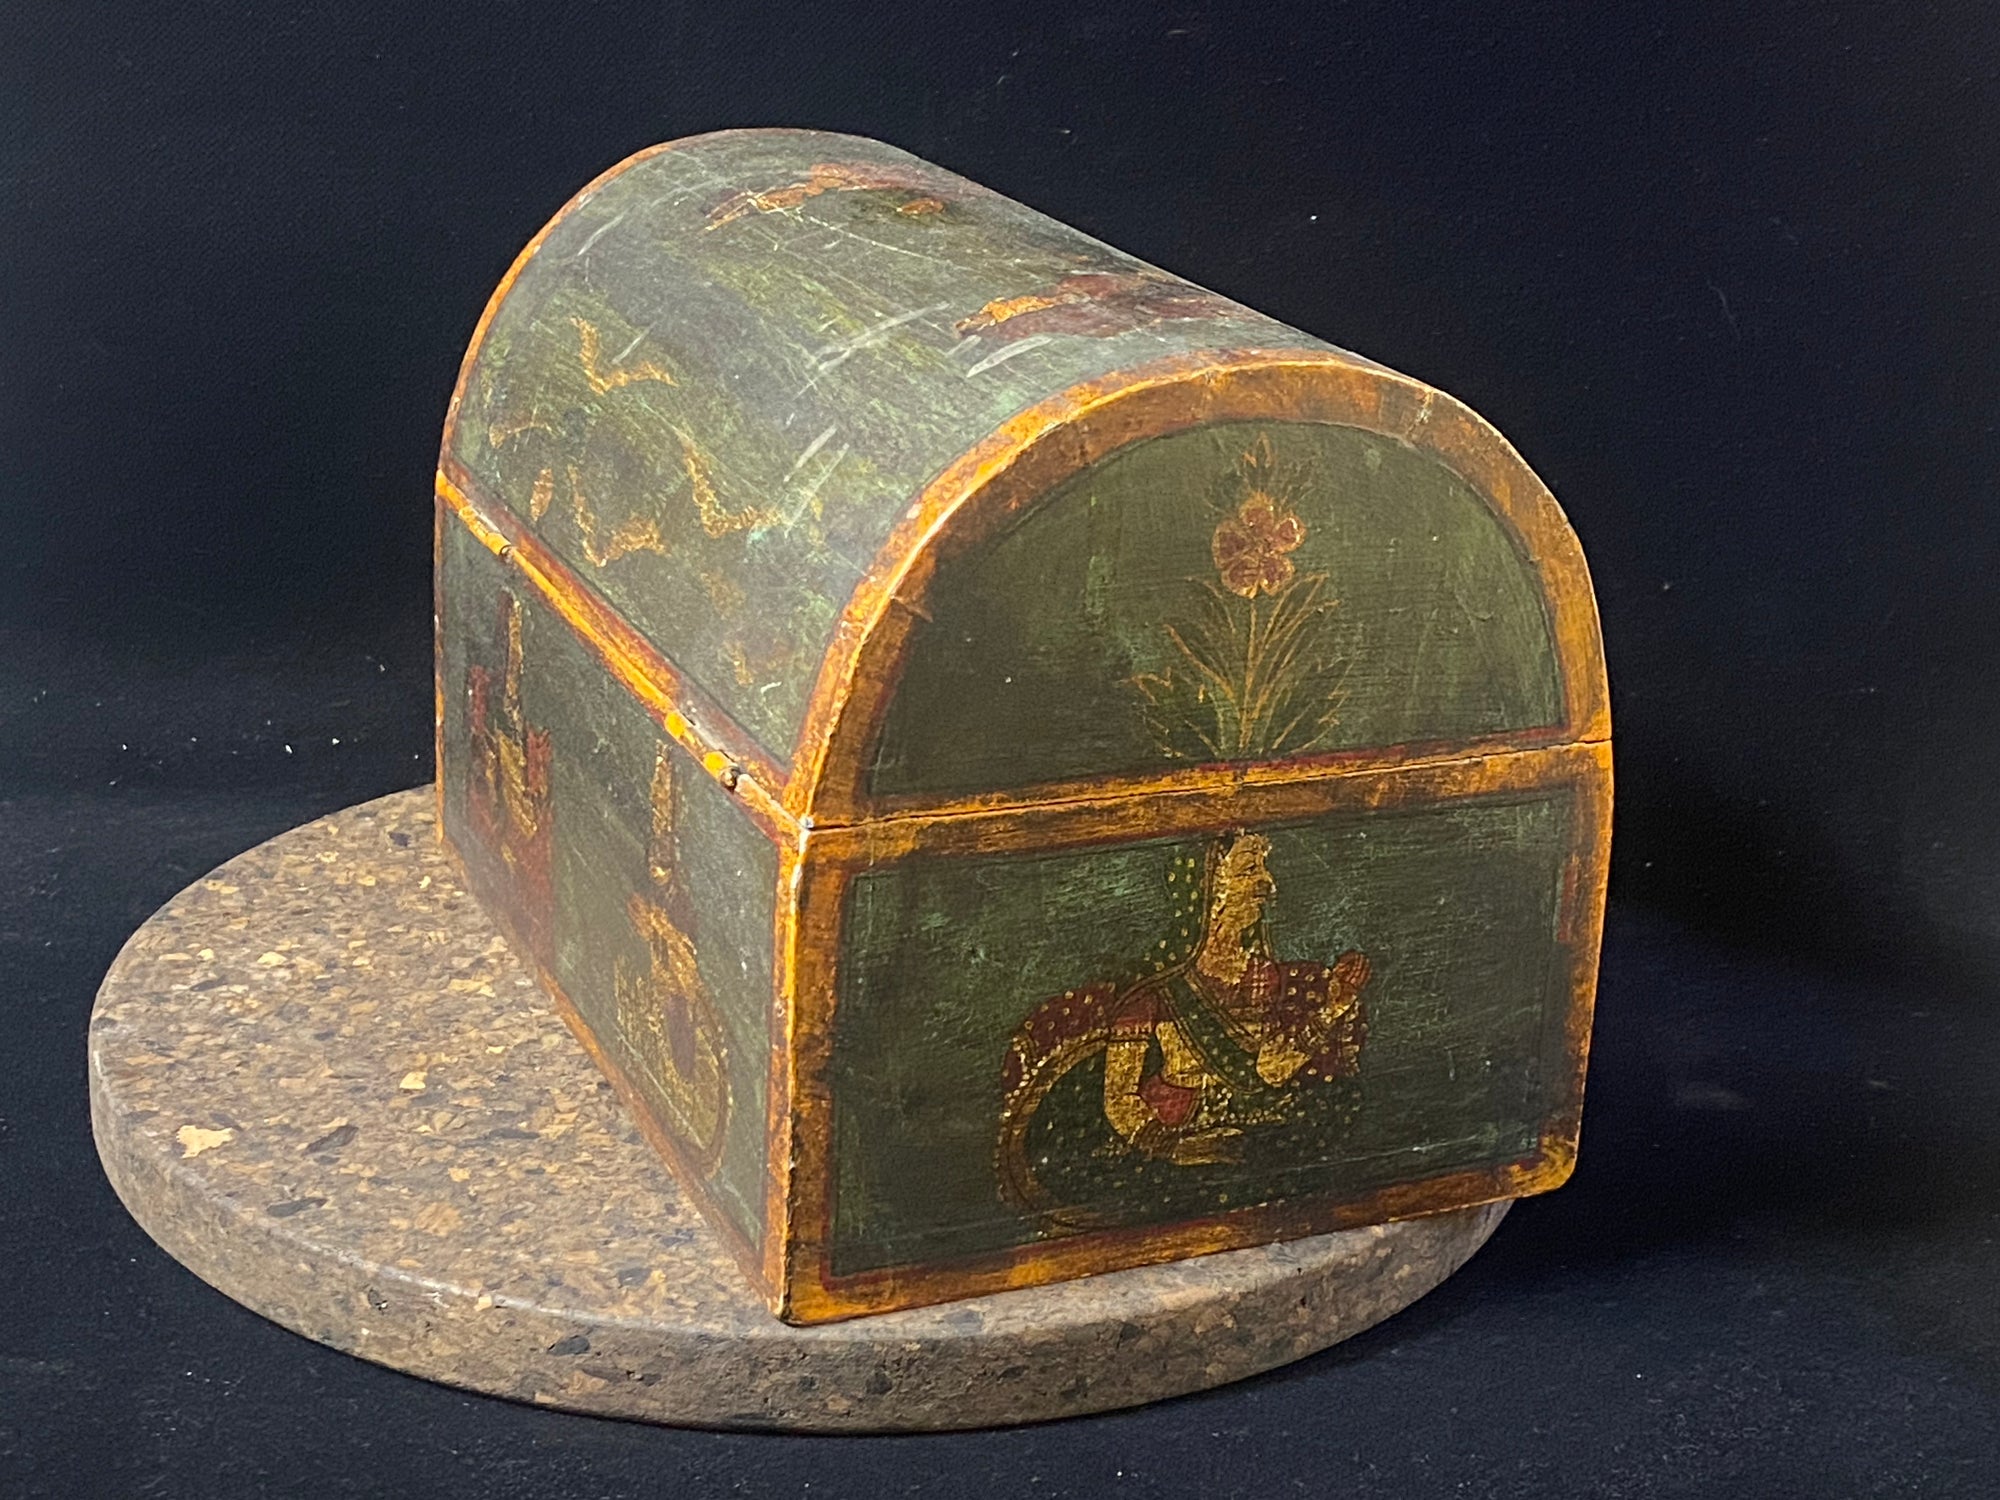 A lovely old painted Indian chest with domed top in the shape of a treasure chest. Painted on all sides with images of Indian lords and ladies. Made from teak. This would make a lovely trinket box, key box, jewellery, watch or cufflink box. Circa 1940. Measurements: length 24 cm x depth 15.5 cm, height 16 cm